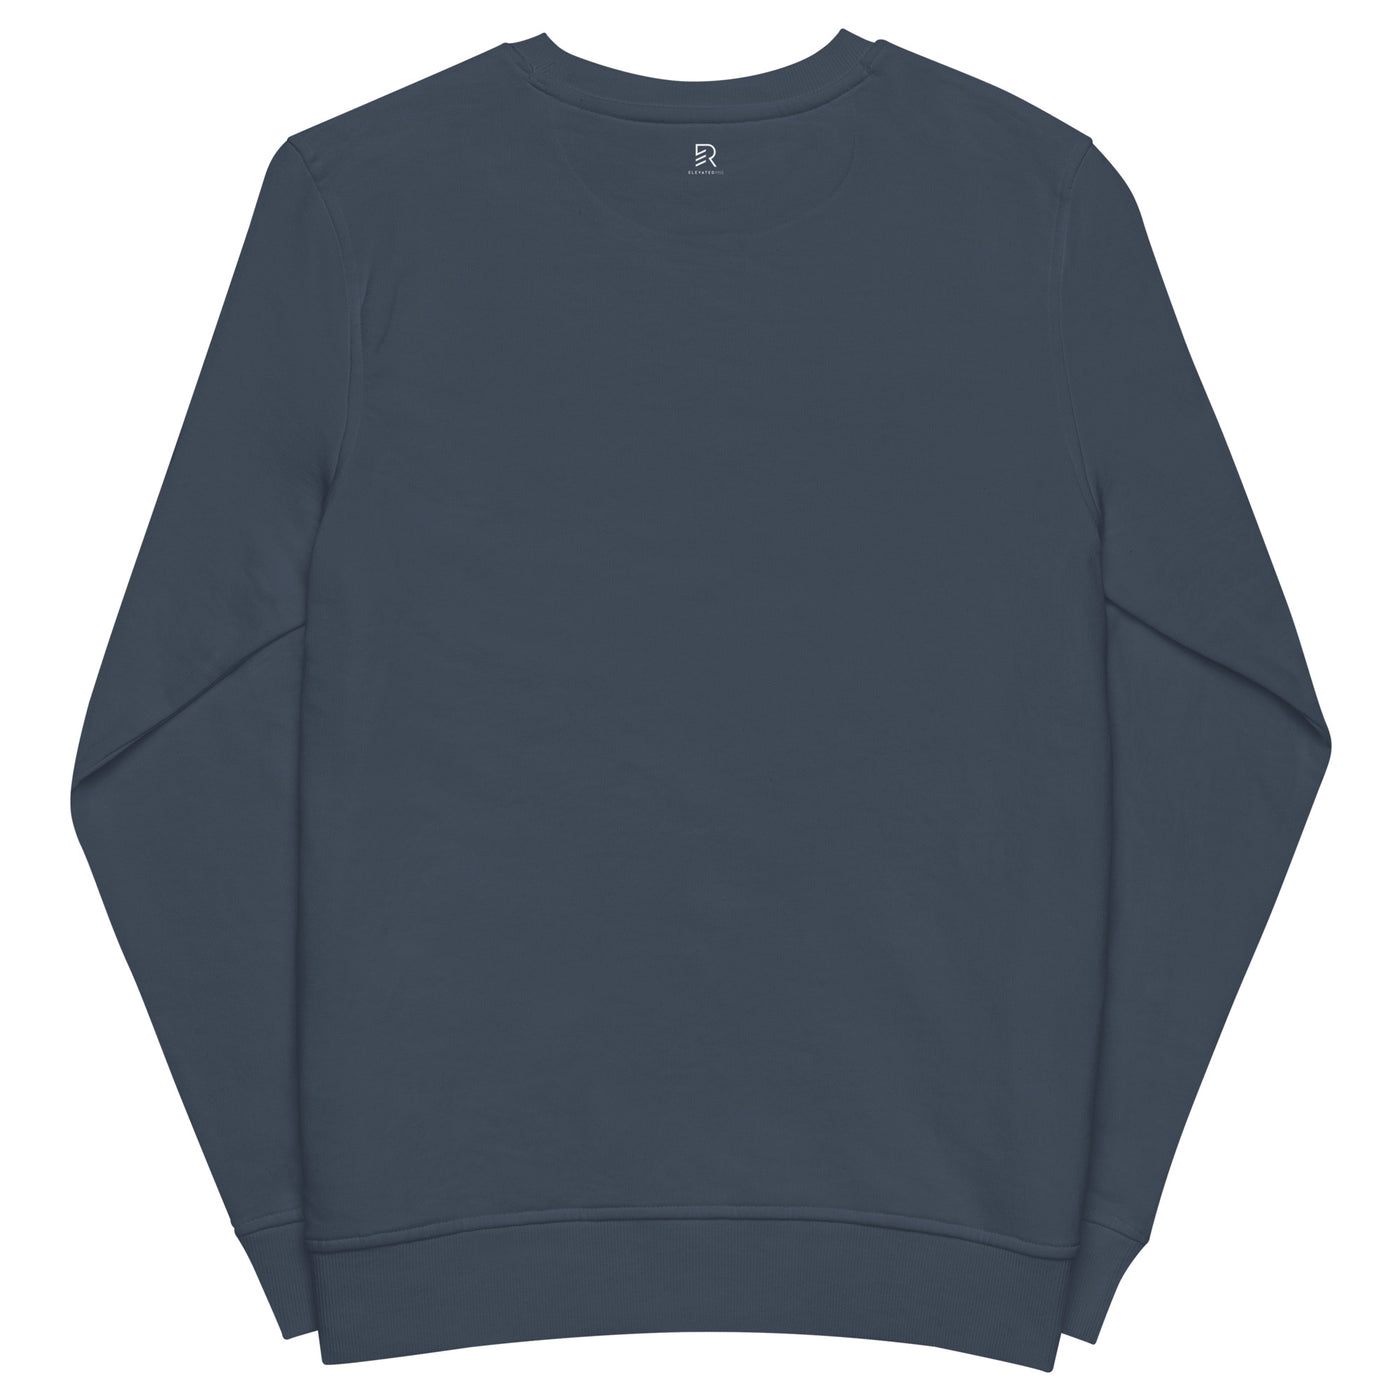 Men's Embroidered Organic French Navy Sweatshirt - Focus & Relax